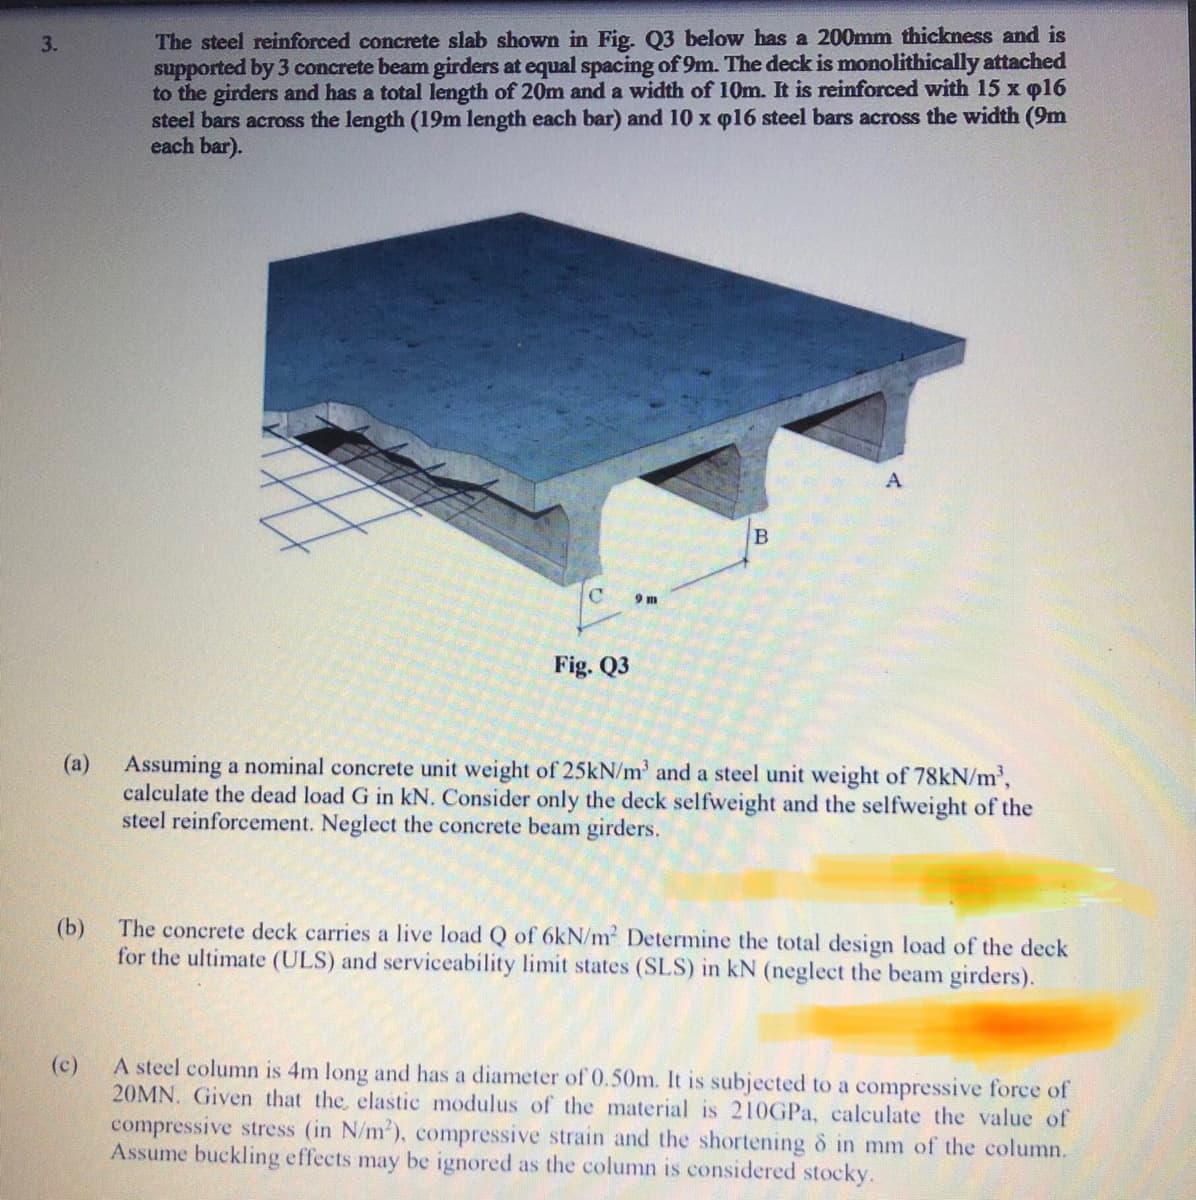 The steel reinforced concrete slab shown in Fig. Q3 below has a 200mm thickness and is
supported by 3 concrete beam girders at equal spacing of 9m. The deck is monolithically attached
to the girders and has a total length of 20m and a width of 10m. It is reinforced with 15 x q16
steel bars across the length (19m length each bar) and 10 x p16 steel bars across the width (9m
each bar).
3.
9 m
Fig. Q3
(a) Assuming a nominal concrete unit weight of 25kN/m' and a steel unit weight of 78kN/m³,
calculate the dead load G in kN. Consider only the deck selfweight and the selfweight of the
steel reinforcement. Neglect the concrete beam girders.
(b)
The concrete deck carries a live load Q of 6kN/m Determine the total design load of the deck
for the ultimate (ULS) and serviceability limit states (SLS) in kN (neglect the beam girders).
(c)
A steel column is 4m long and has a diameter of 0.50m. It is subjected to a compressive force of
20MN. Given that the, elastic modulus of the material is 210GPA, calculate the value of
compressive stress (in N/m'), compressive strain and the shortening o in mm of the column.
Assume buckling effects may be ignored as the column is considered stocky.
